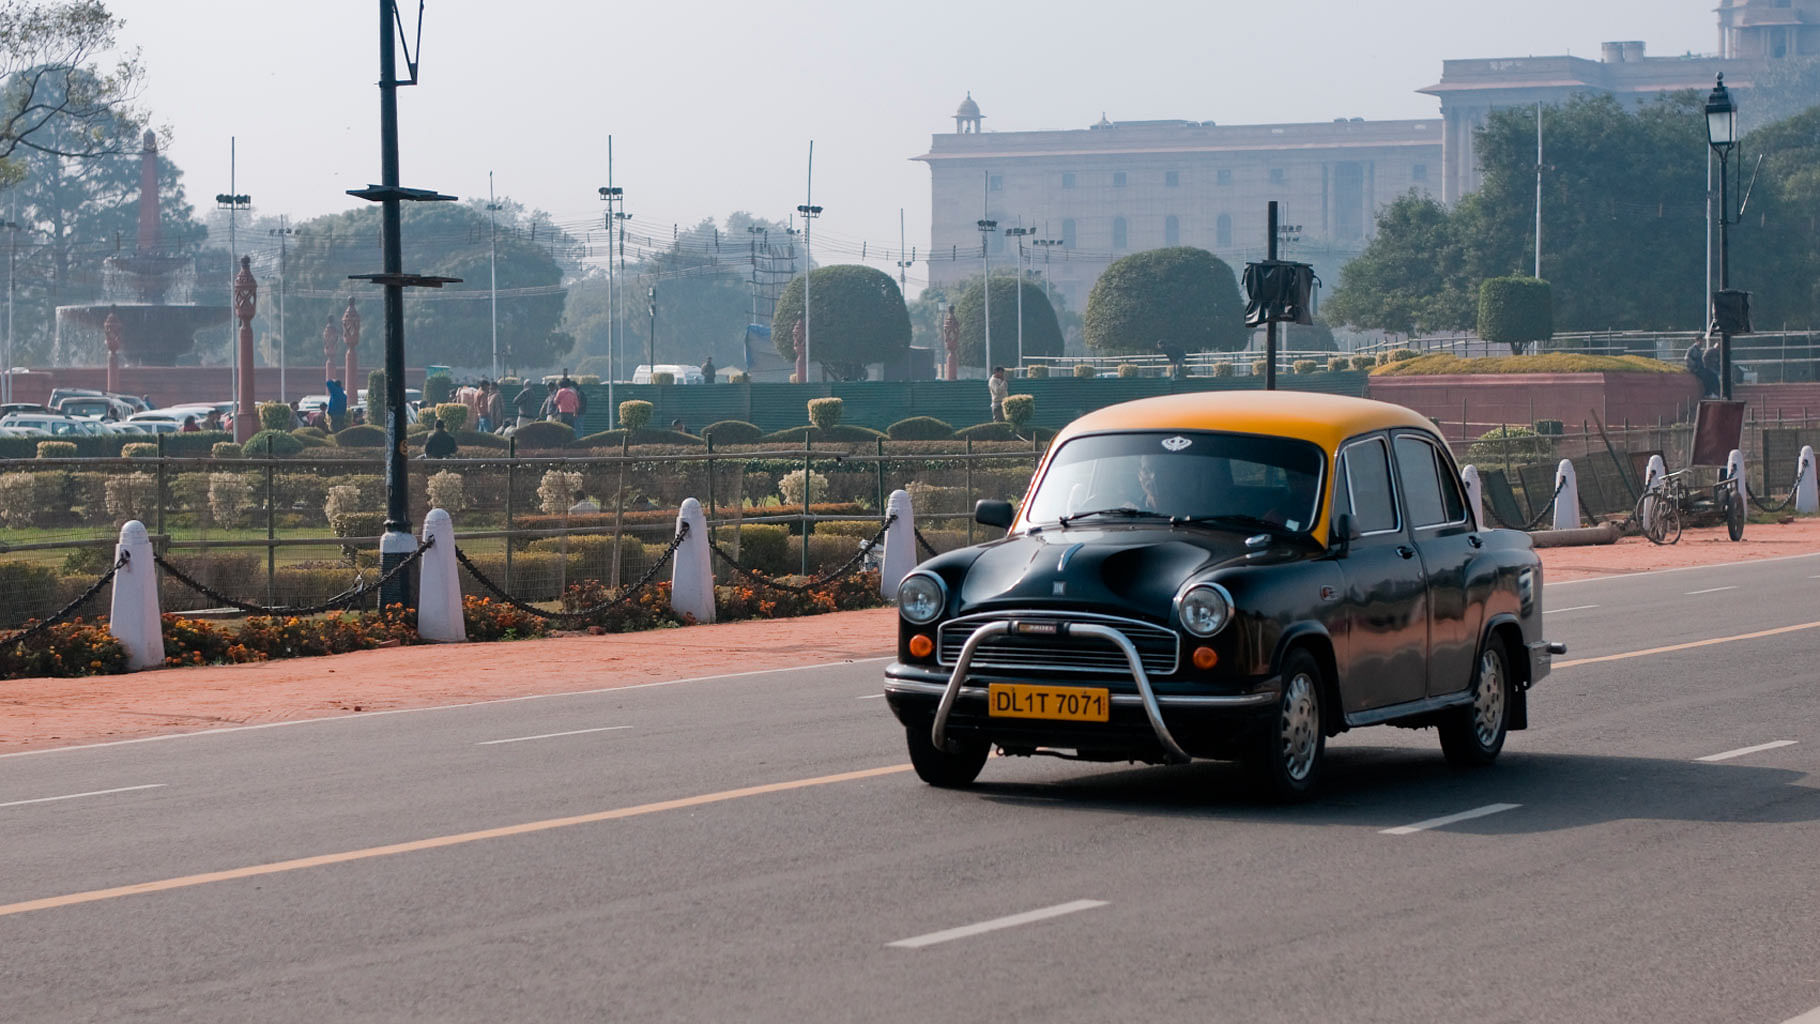 A taxi on the roads of Delhi. (Photo: iStockphoto)